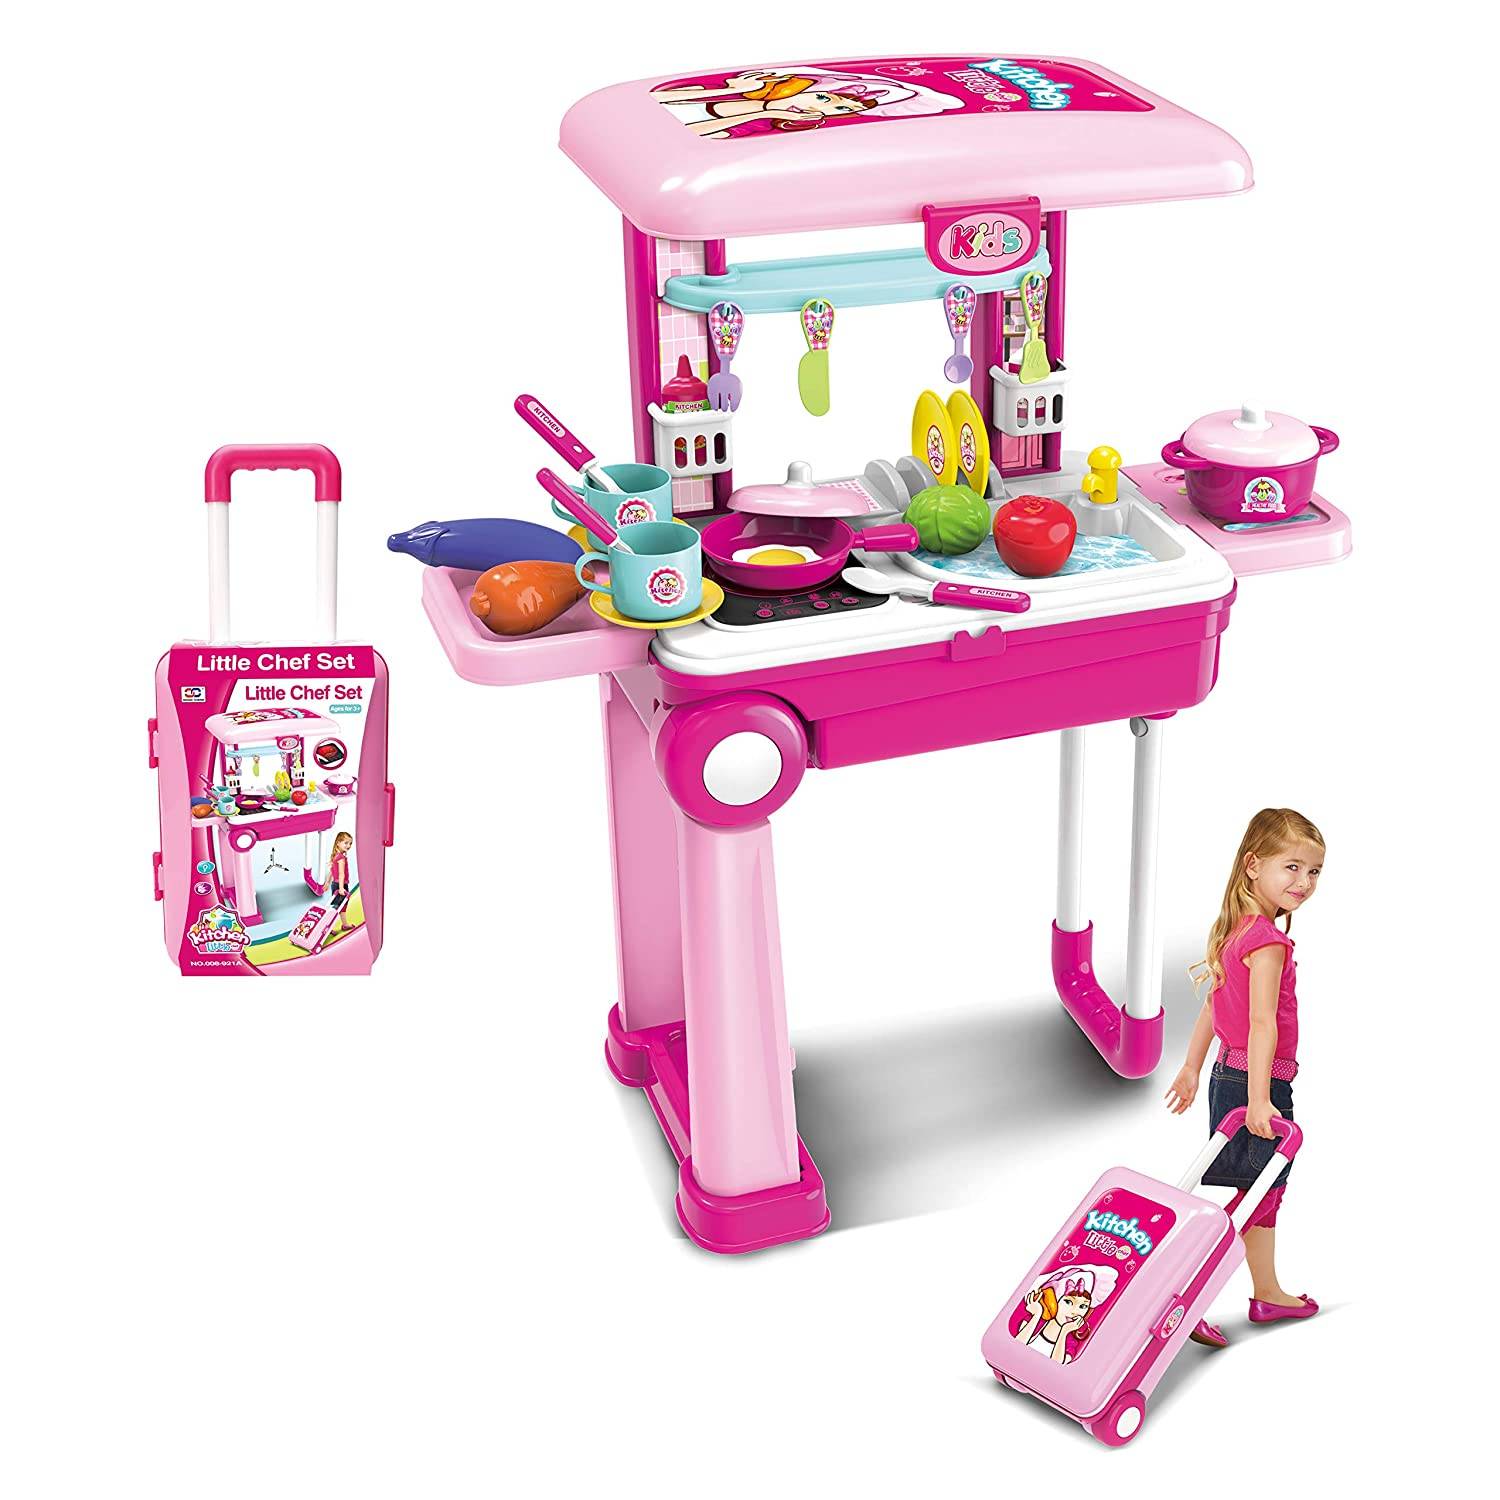 Beautiful kitchen sets for girls   Business Insider India